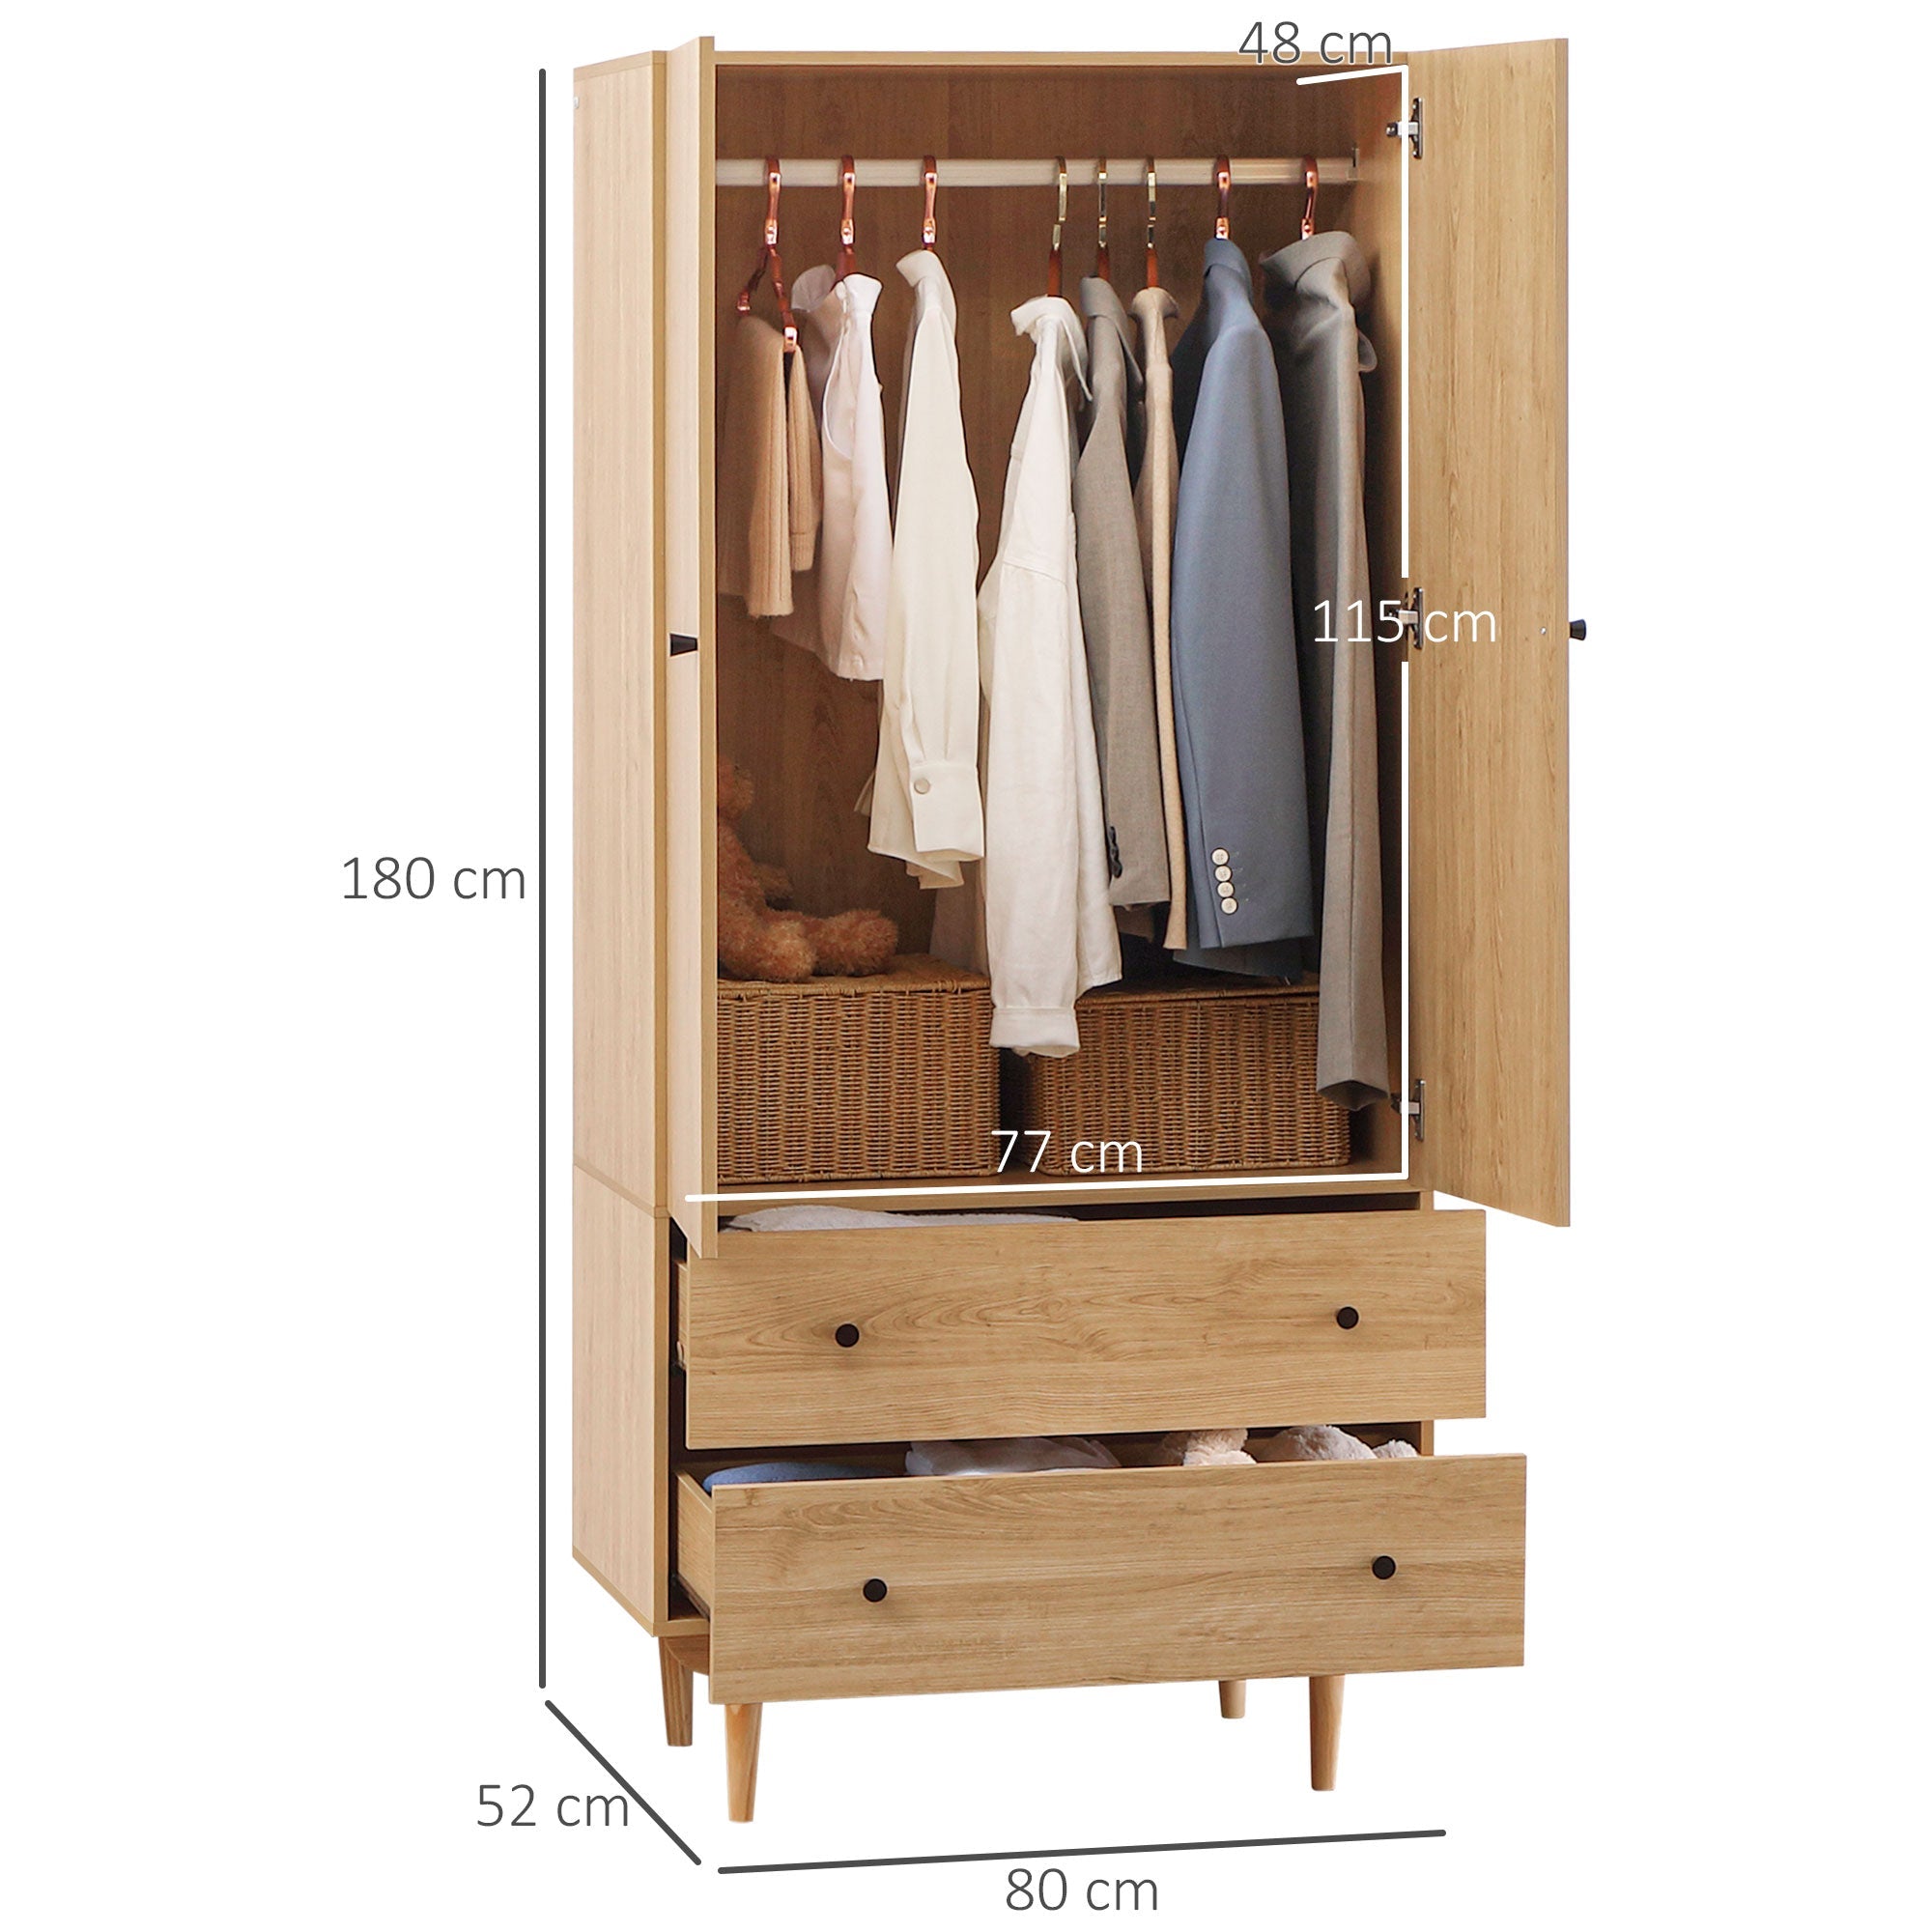 Wardrobe with 2 Doors, 2 Drawers, Hanging Rail for Bedroom Clothes Storage Organiser, 80x52x180cm, Natural Tone-2